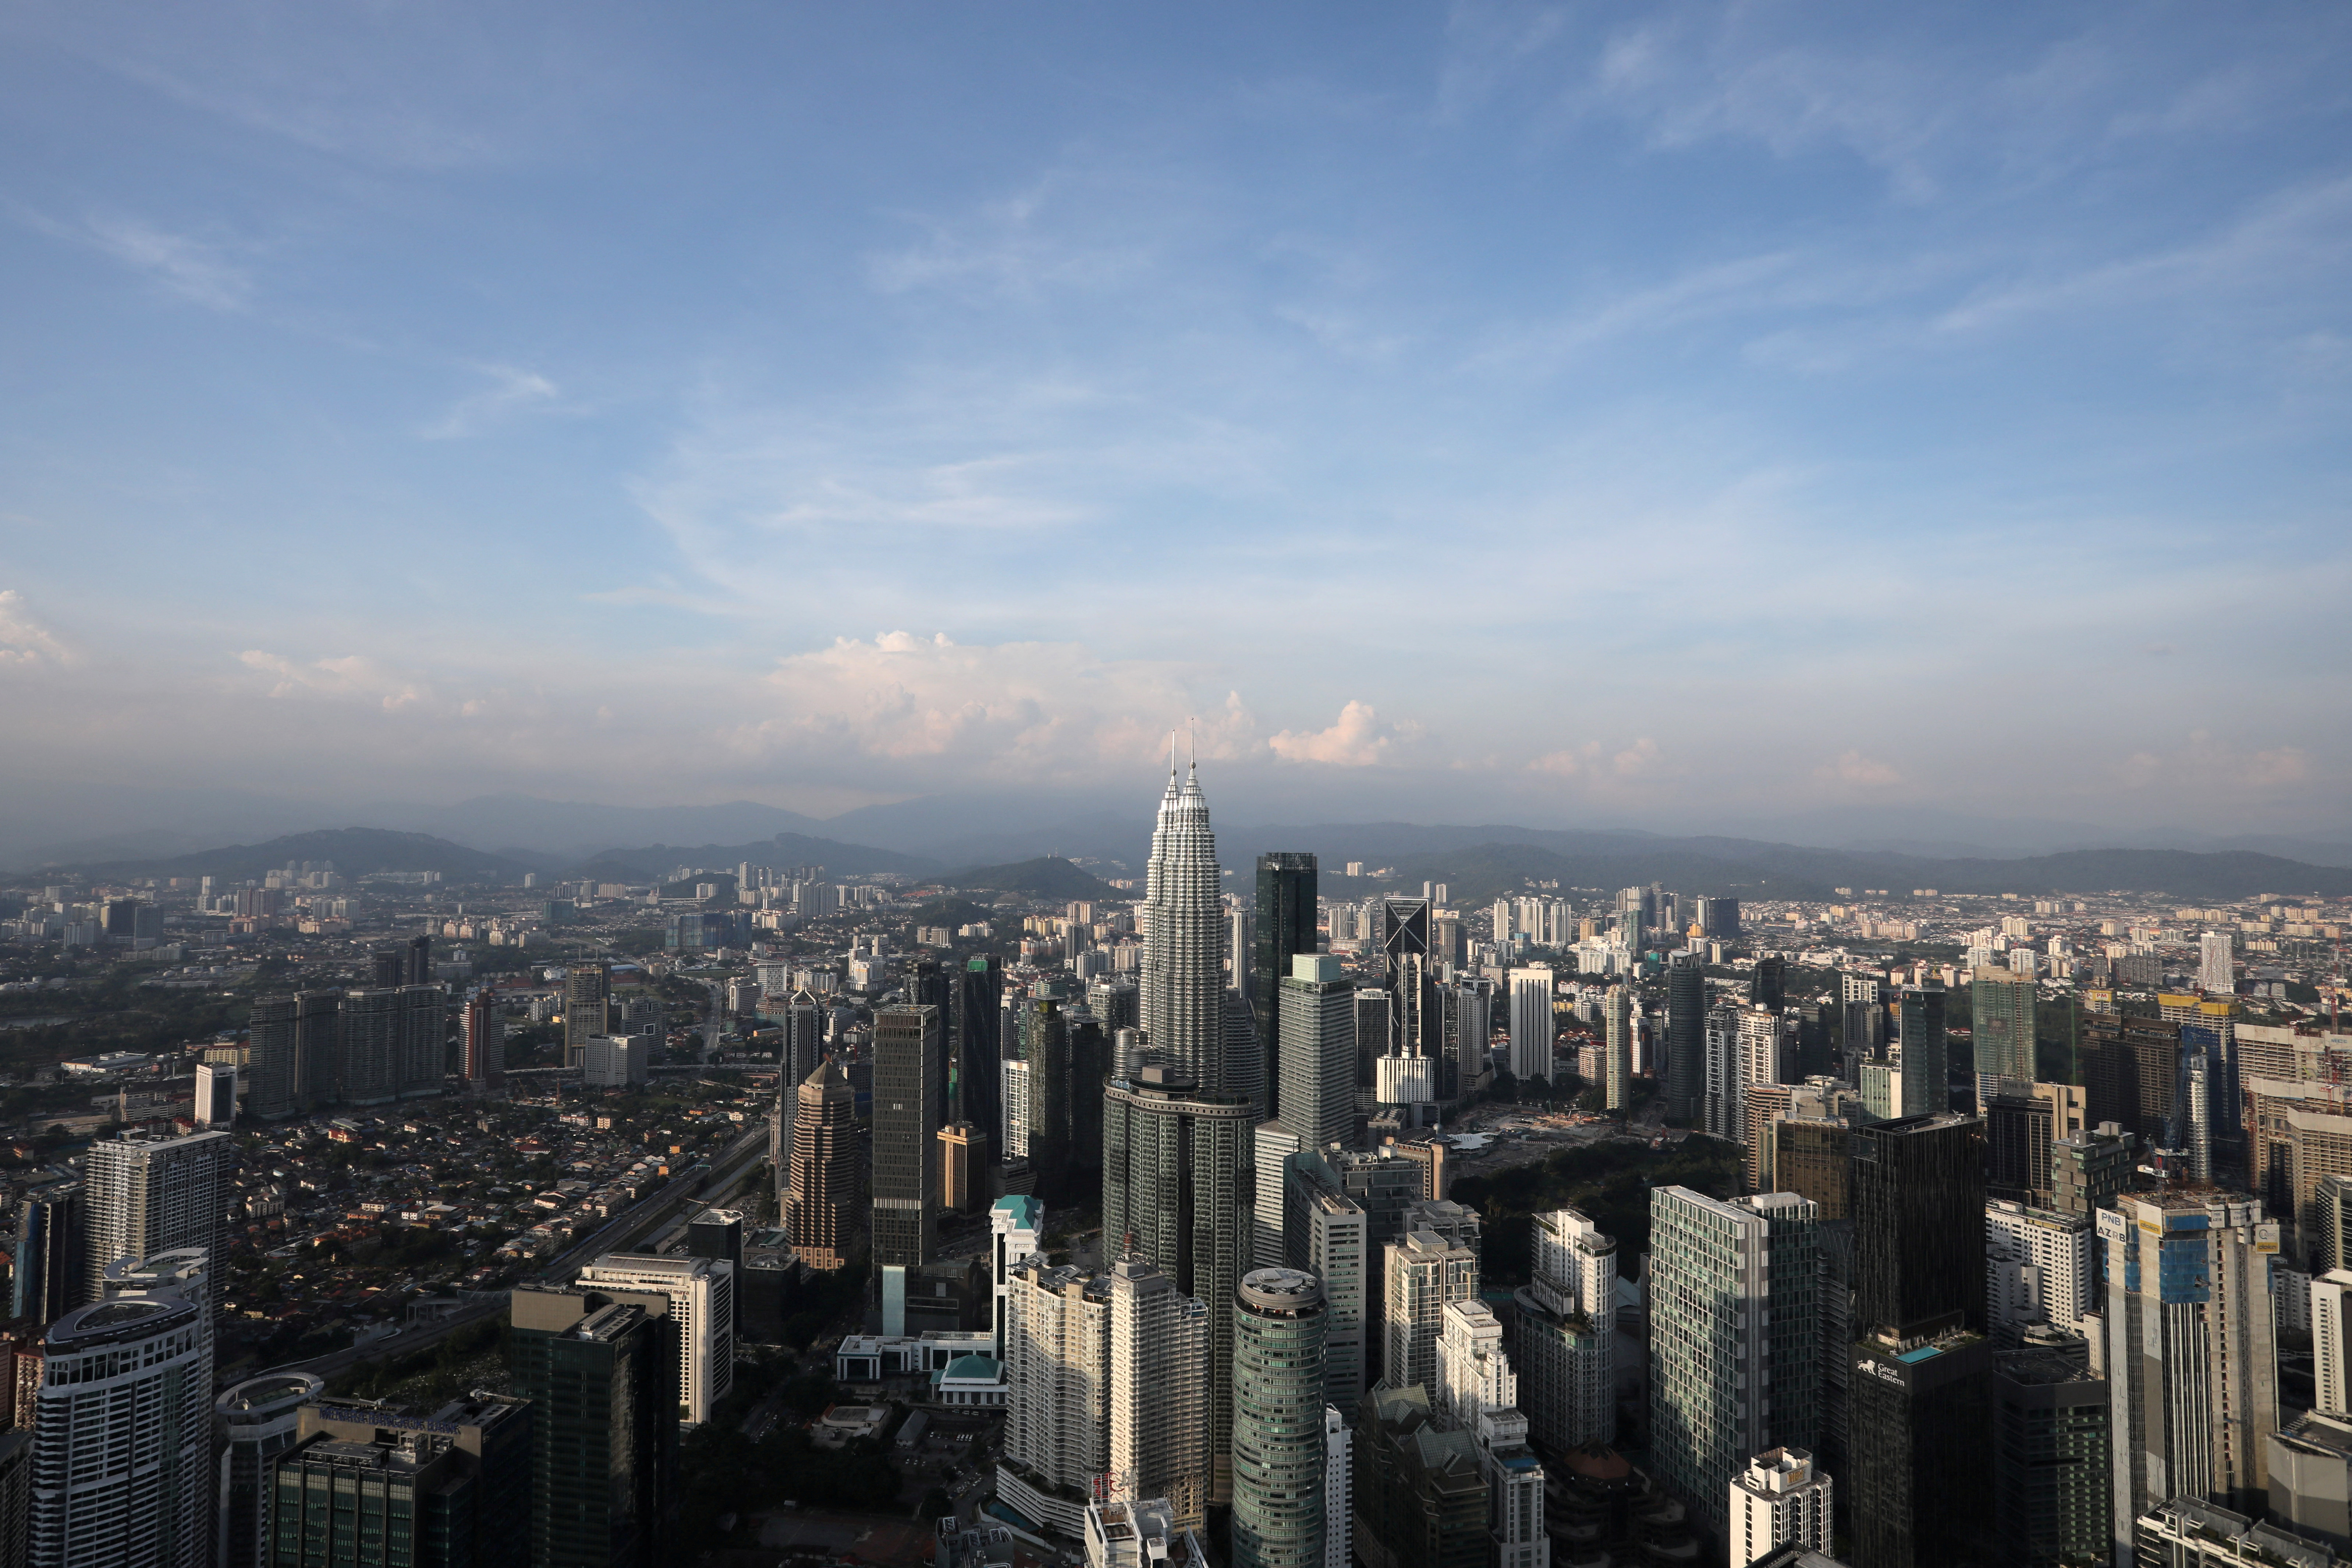 A view of the city skyline in Kuala Lumpur